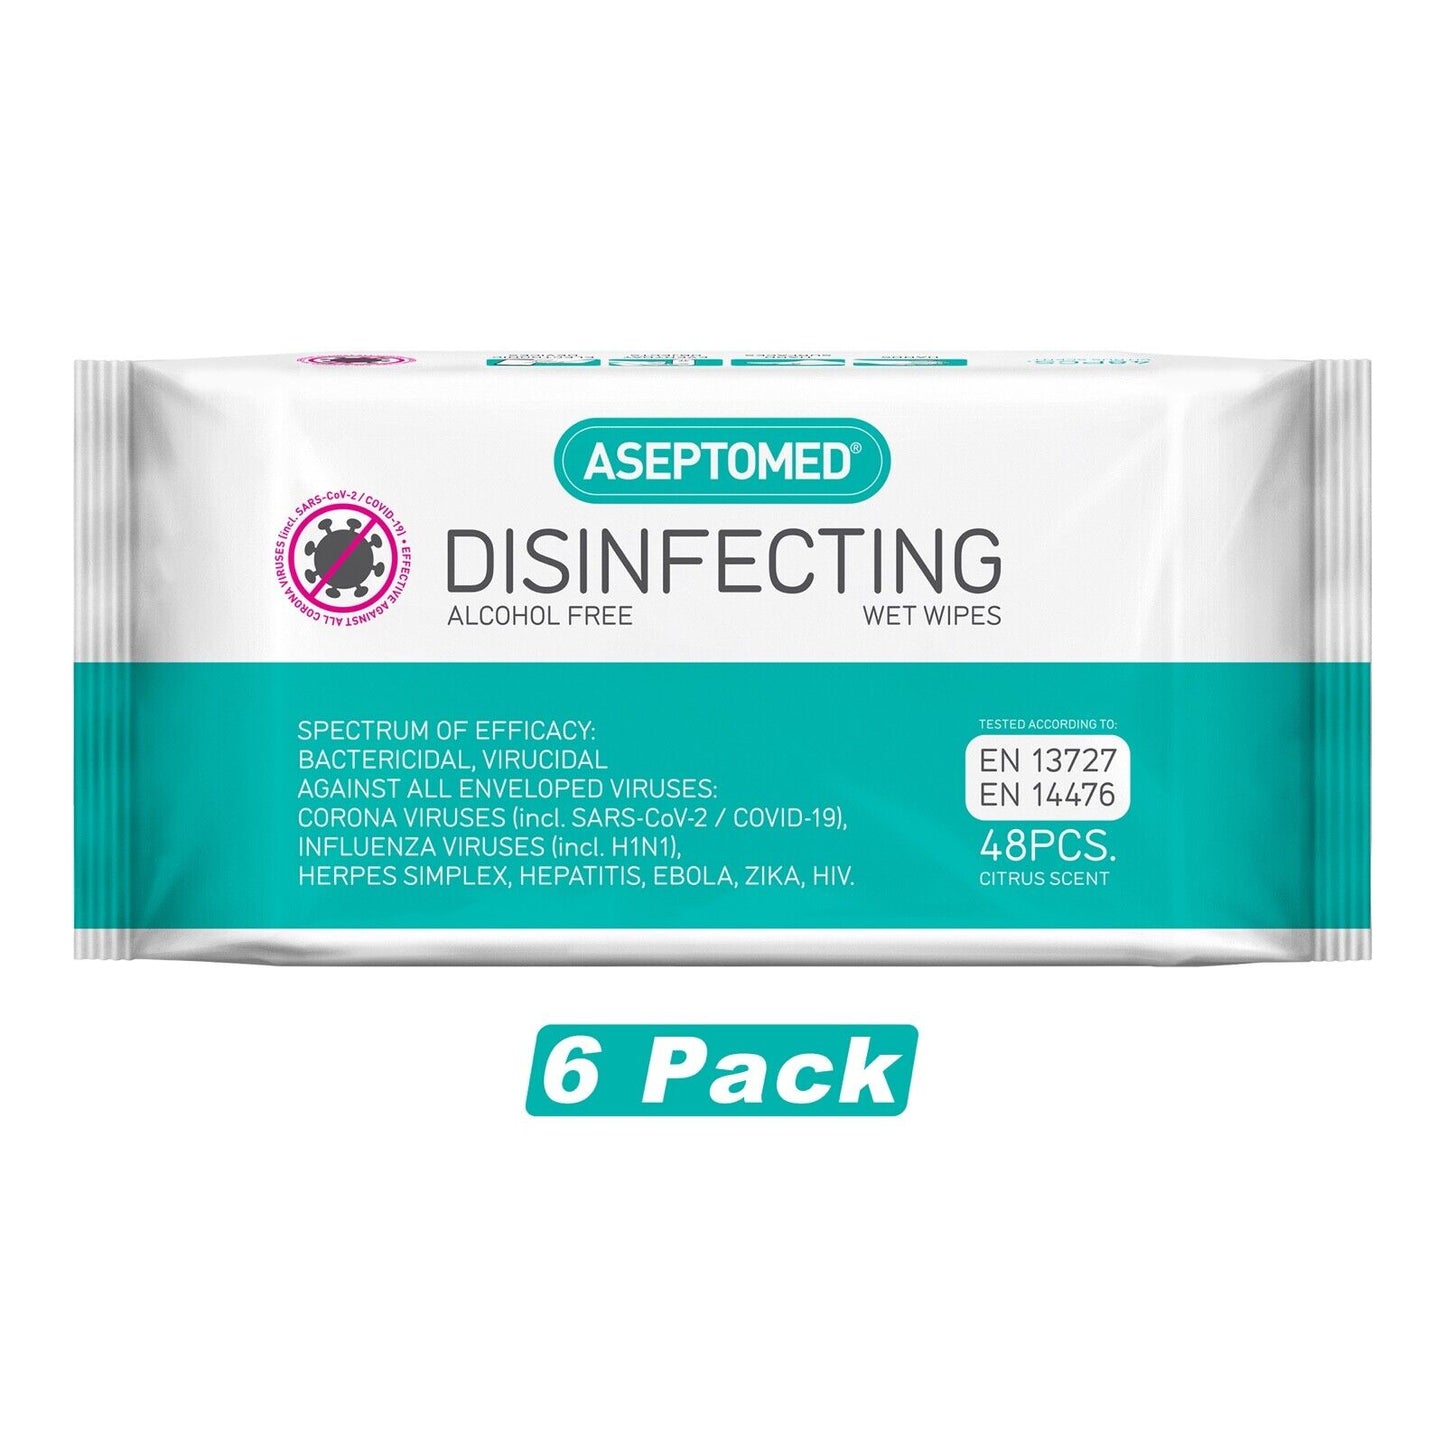 6Pk Aseptomed Disinfecting Alcohol Free Wipes (48Wipes) Citrus Scent SEE PHOTOS